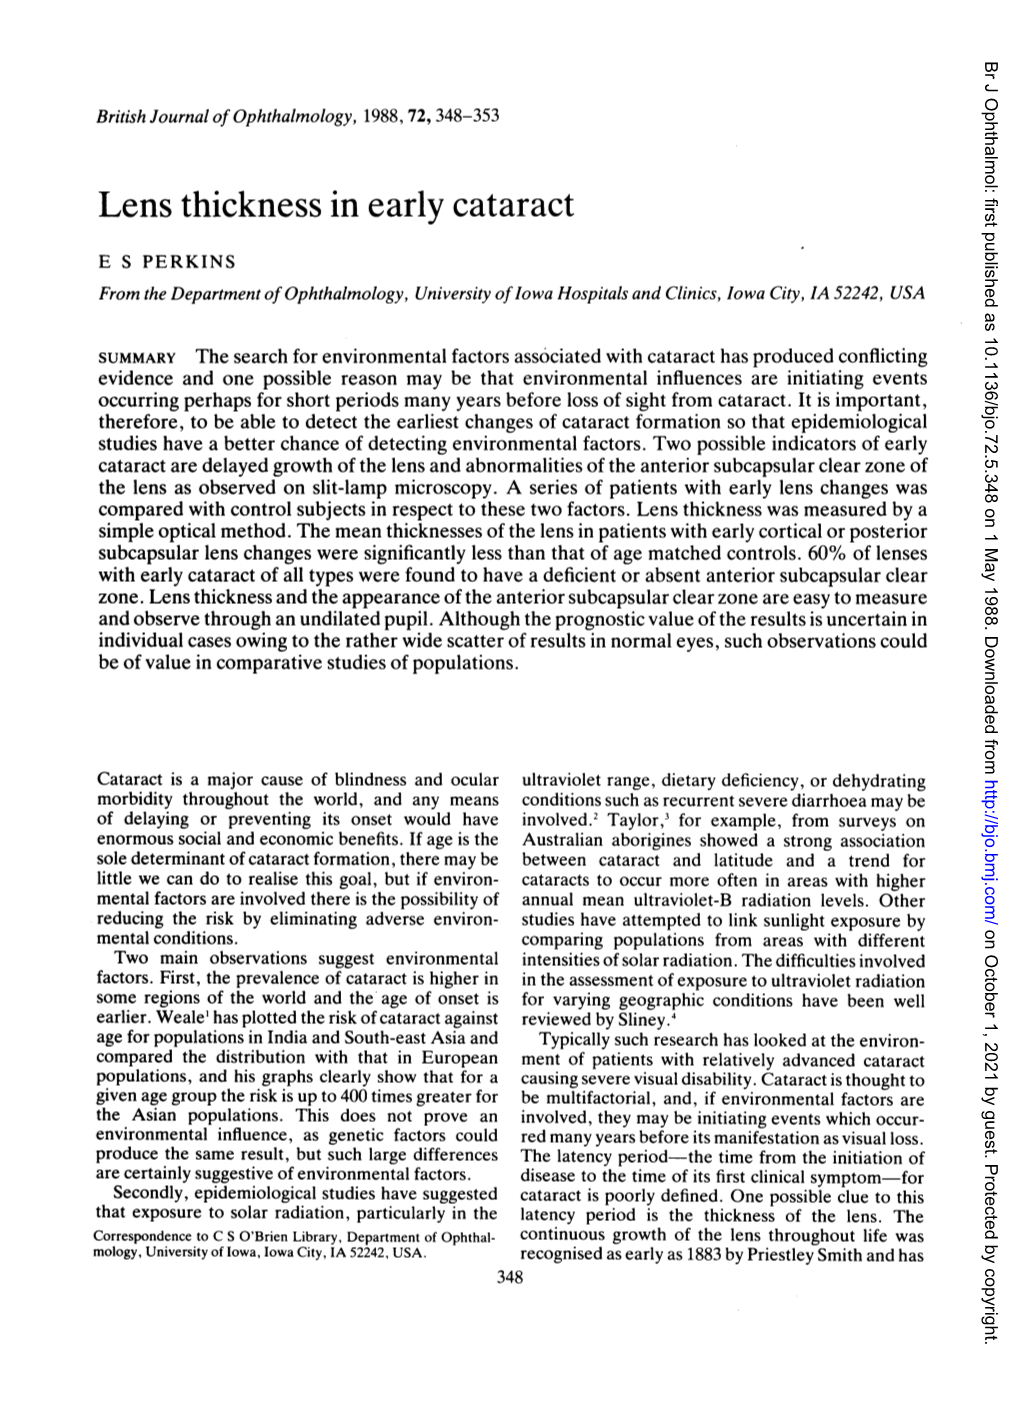 Lens Thickness in Early Cataract